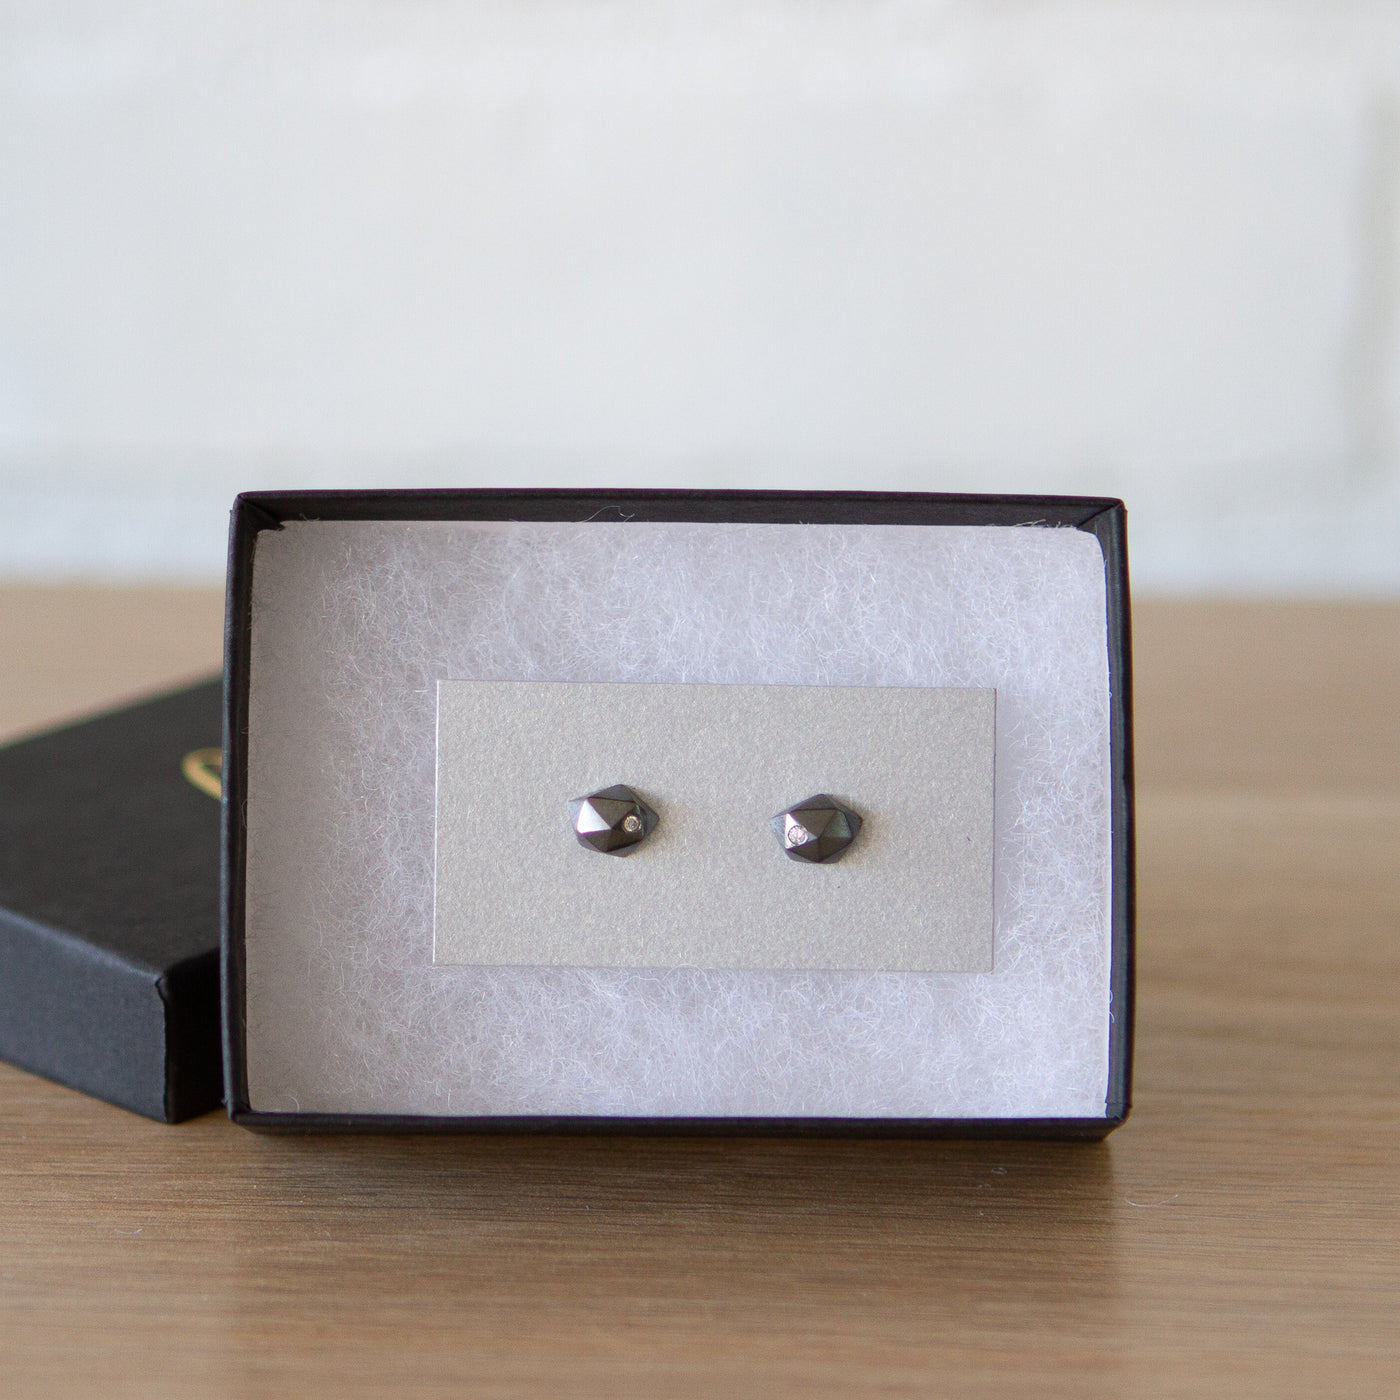 Oxidized Silver Faceted Stud earrings with Diamonds in a gift box